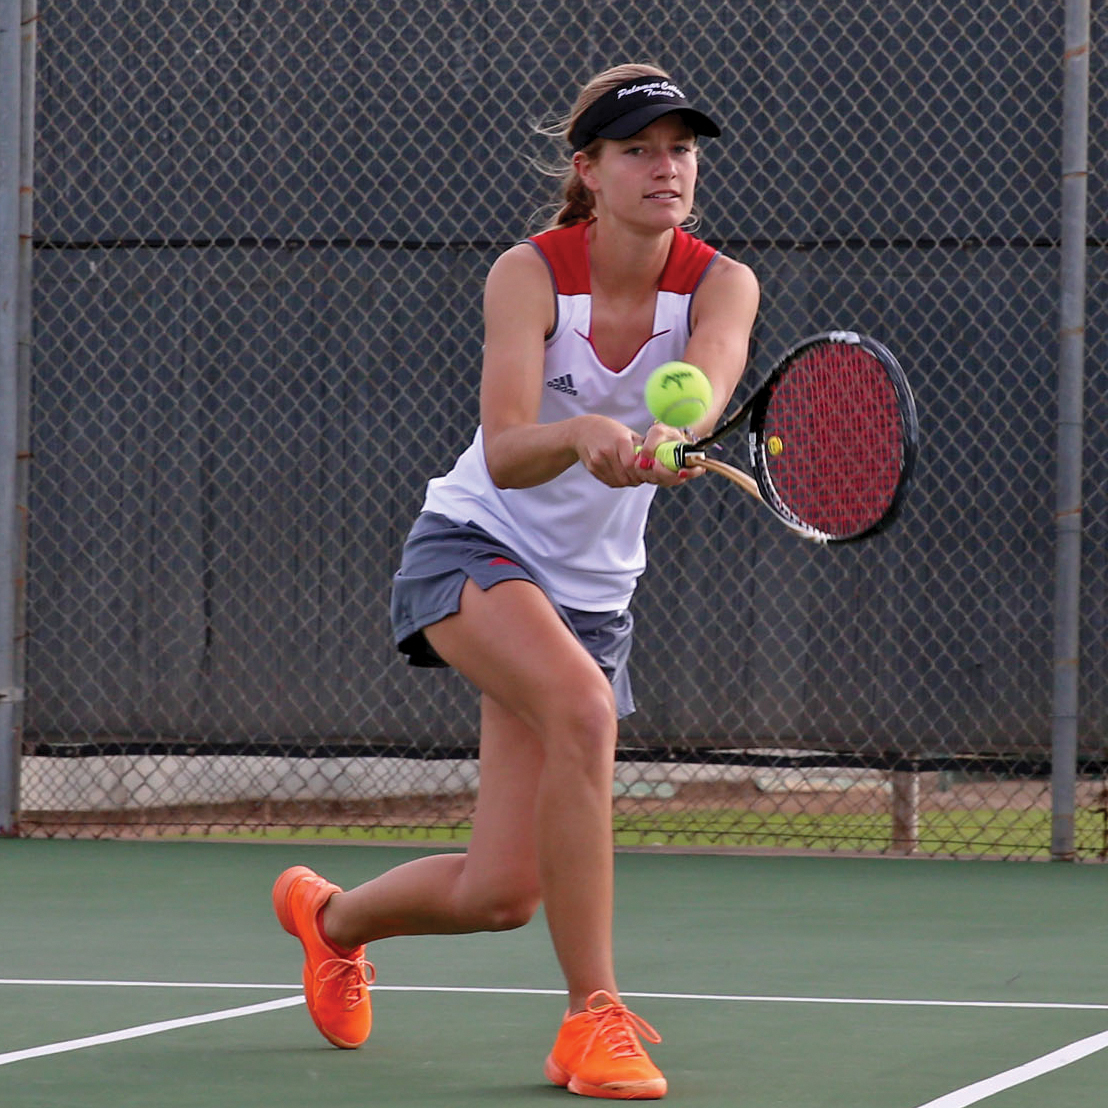 Palomar tennis player Remy Littrel swings a tennis racket with both hands at a tennis ball in a tennis court. She wears a white sleeveless jersey with red on the upper shoulders, gray shorts, a black visor, and orange shoes.